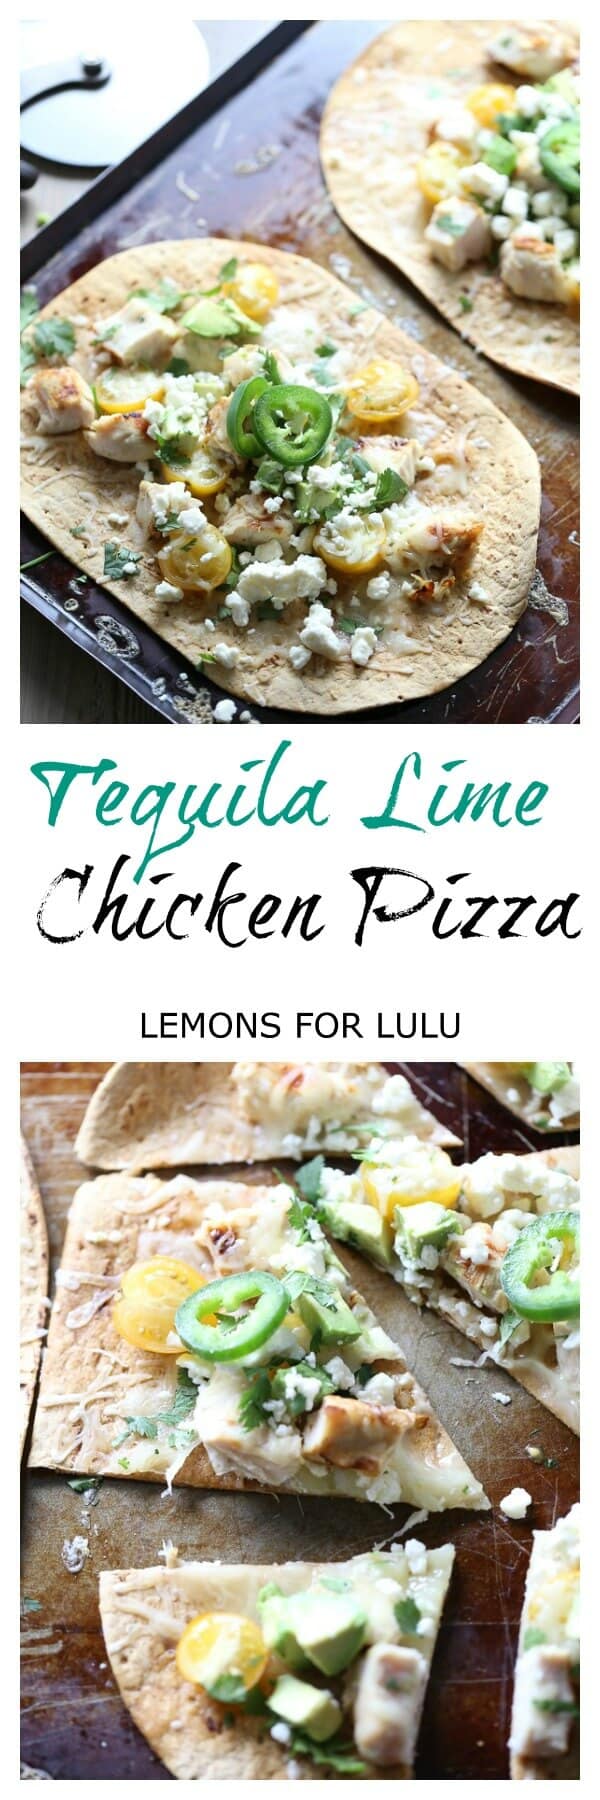 Flatbread pizza with tequila lime chicken is one easy dinner your whole family will love! lemonsforlulu.com